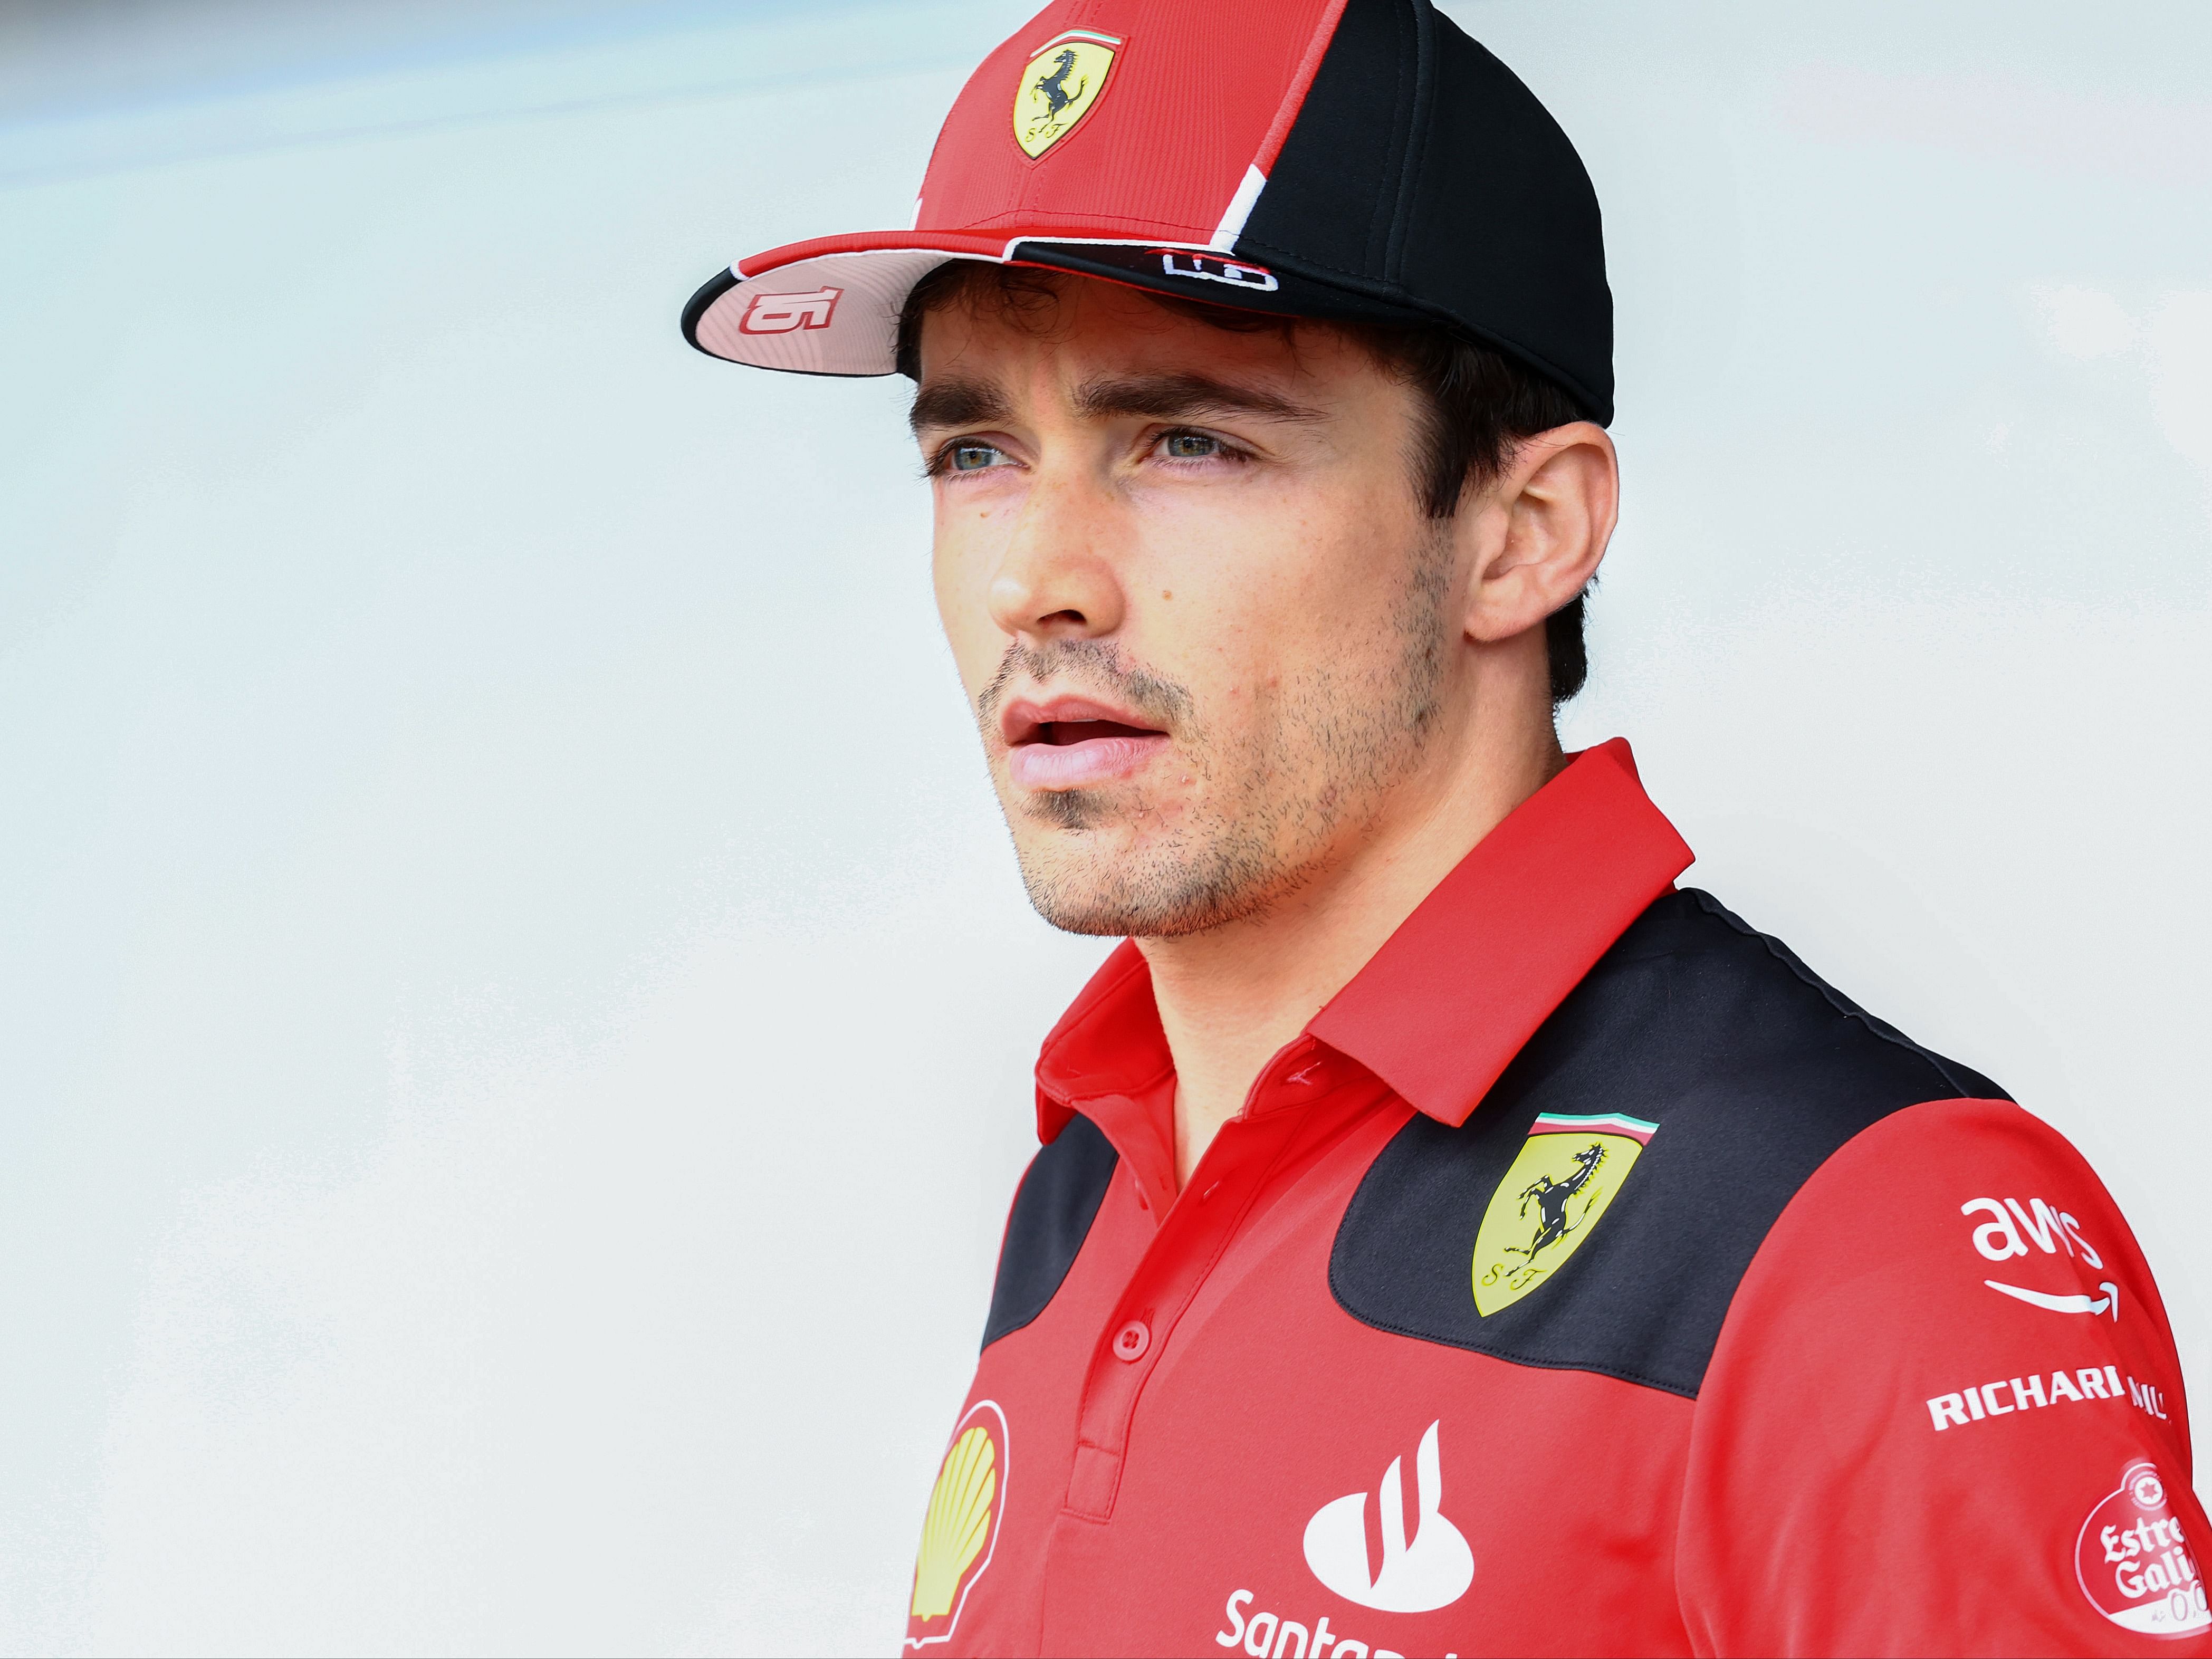 F1 Grand Prix of AzerbaijanCharles Leclerc looks on in the paddock prior to the 2023 F1 Azerbaijan Grand Prix. (Photo by Mark Thompson/Getty Images)